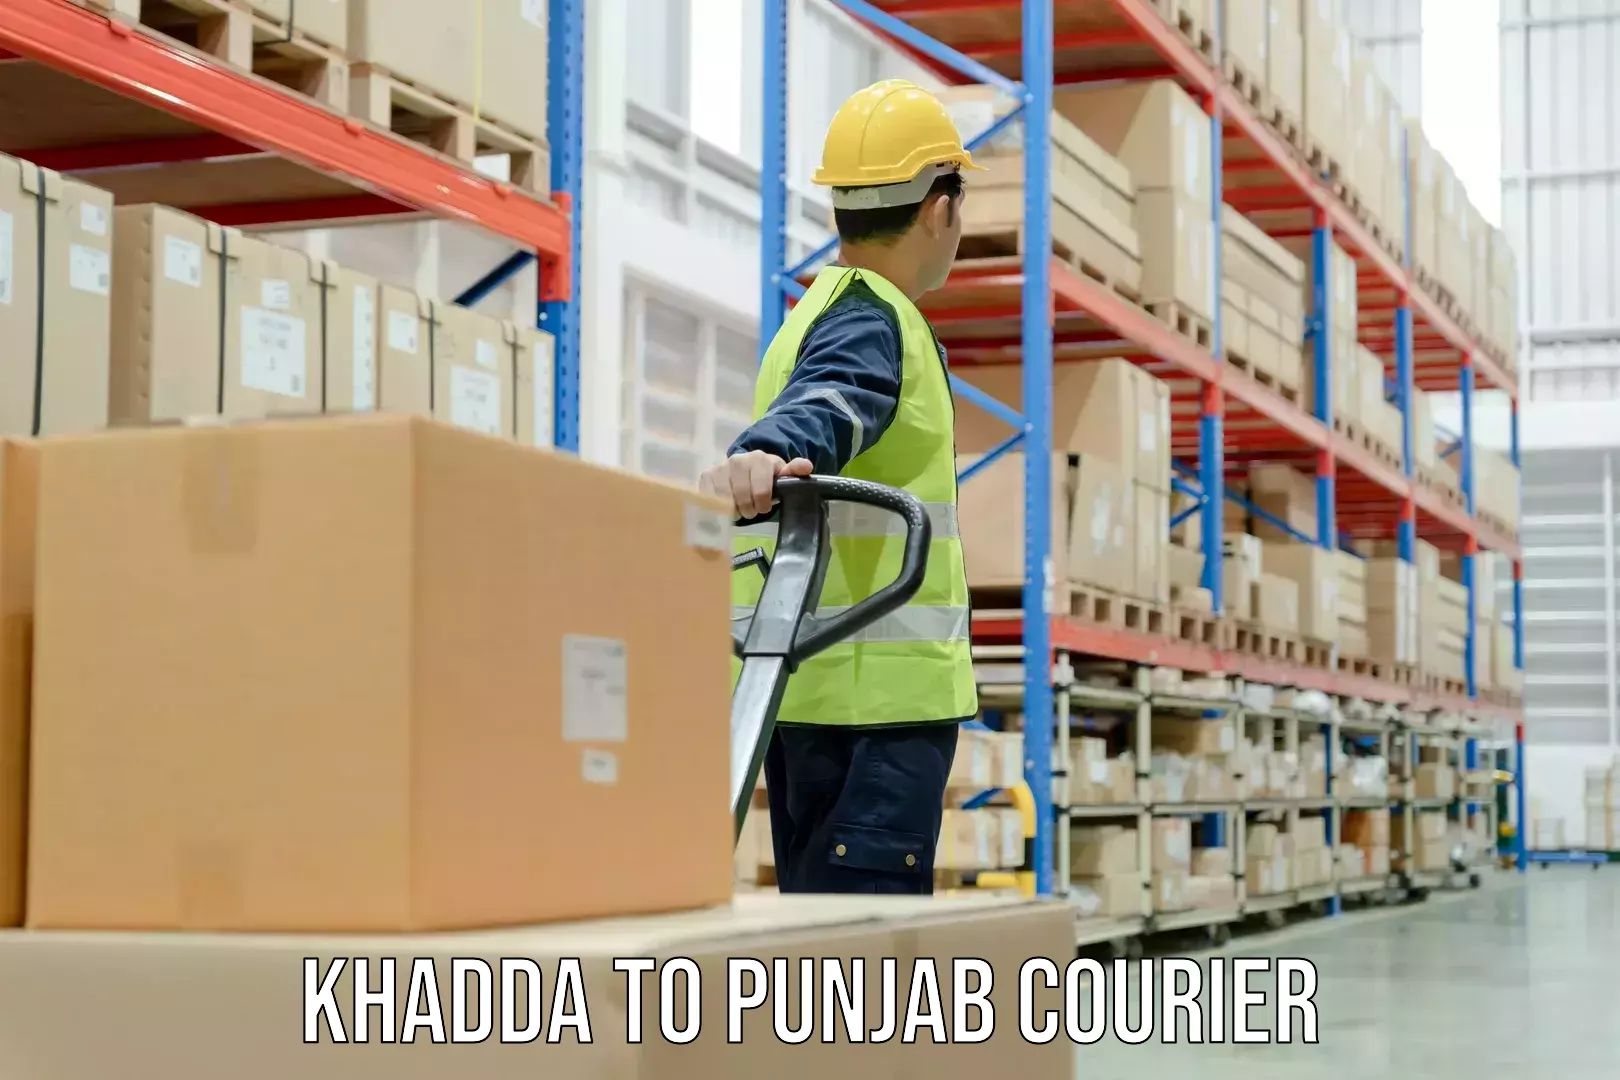 Overnight delivery services Khadda to Punjab